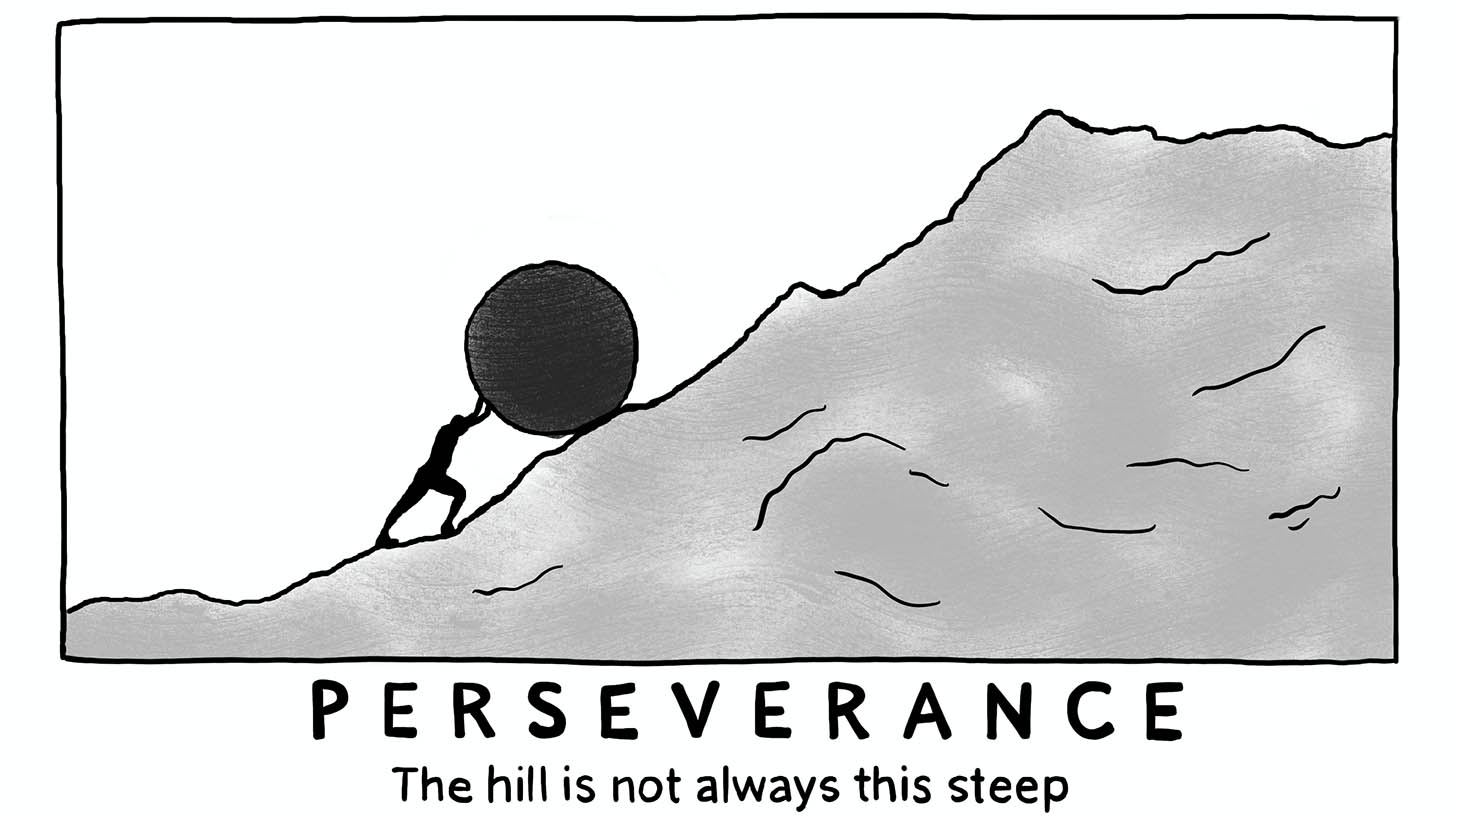 Perseverence: The hill is not always this steep